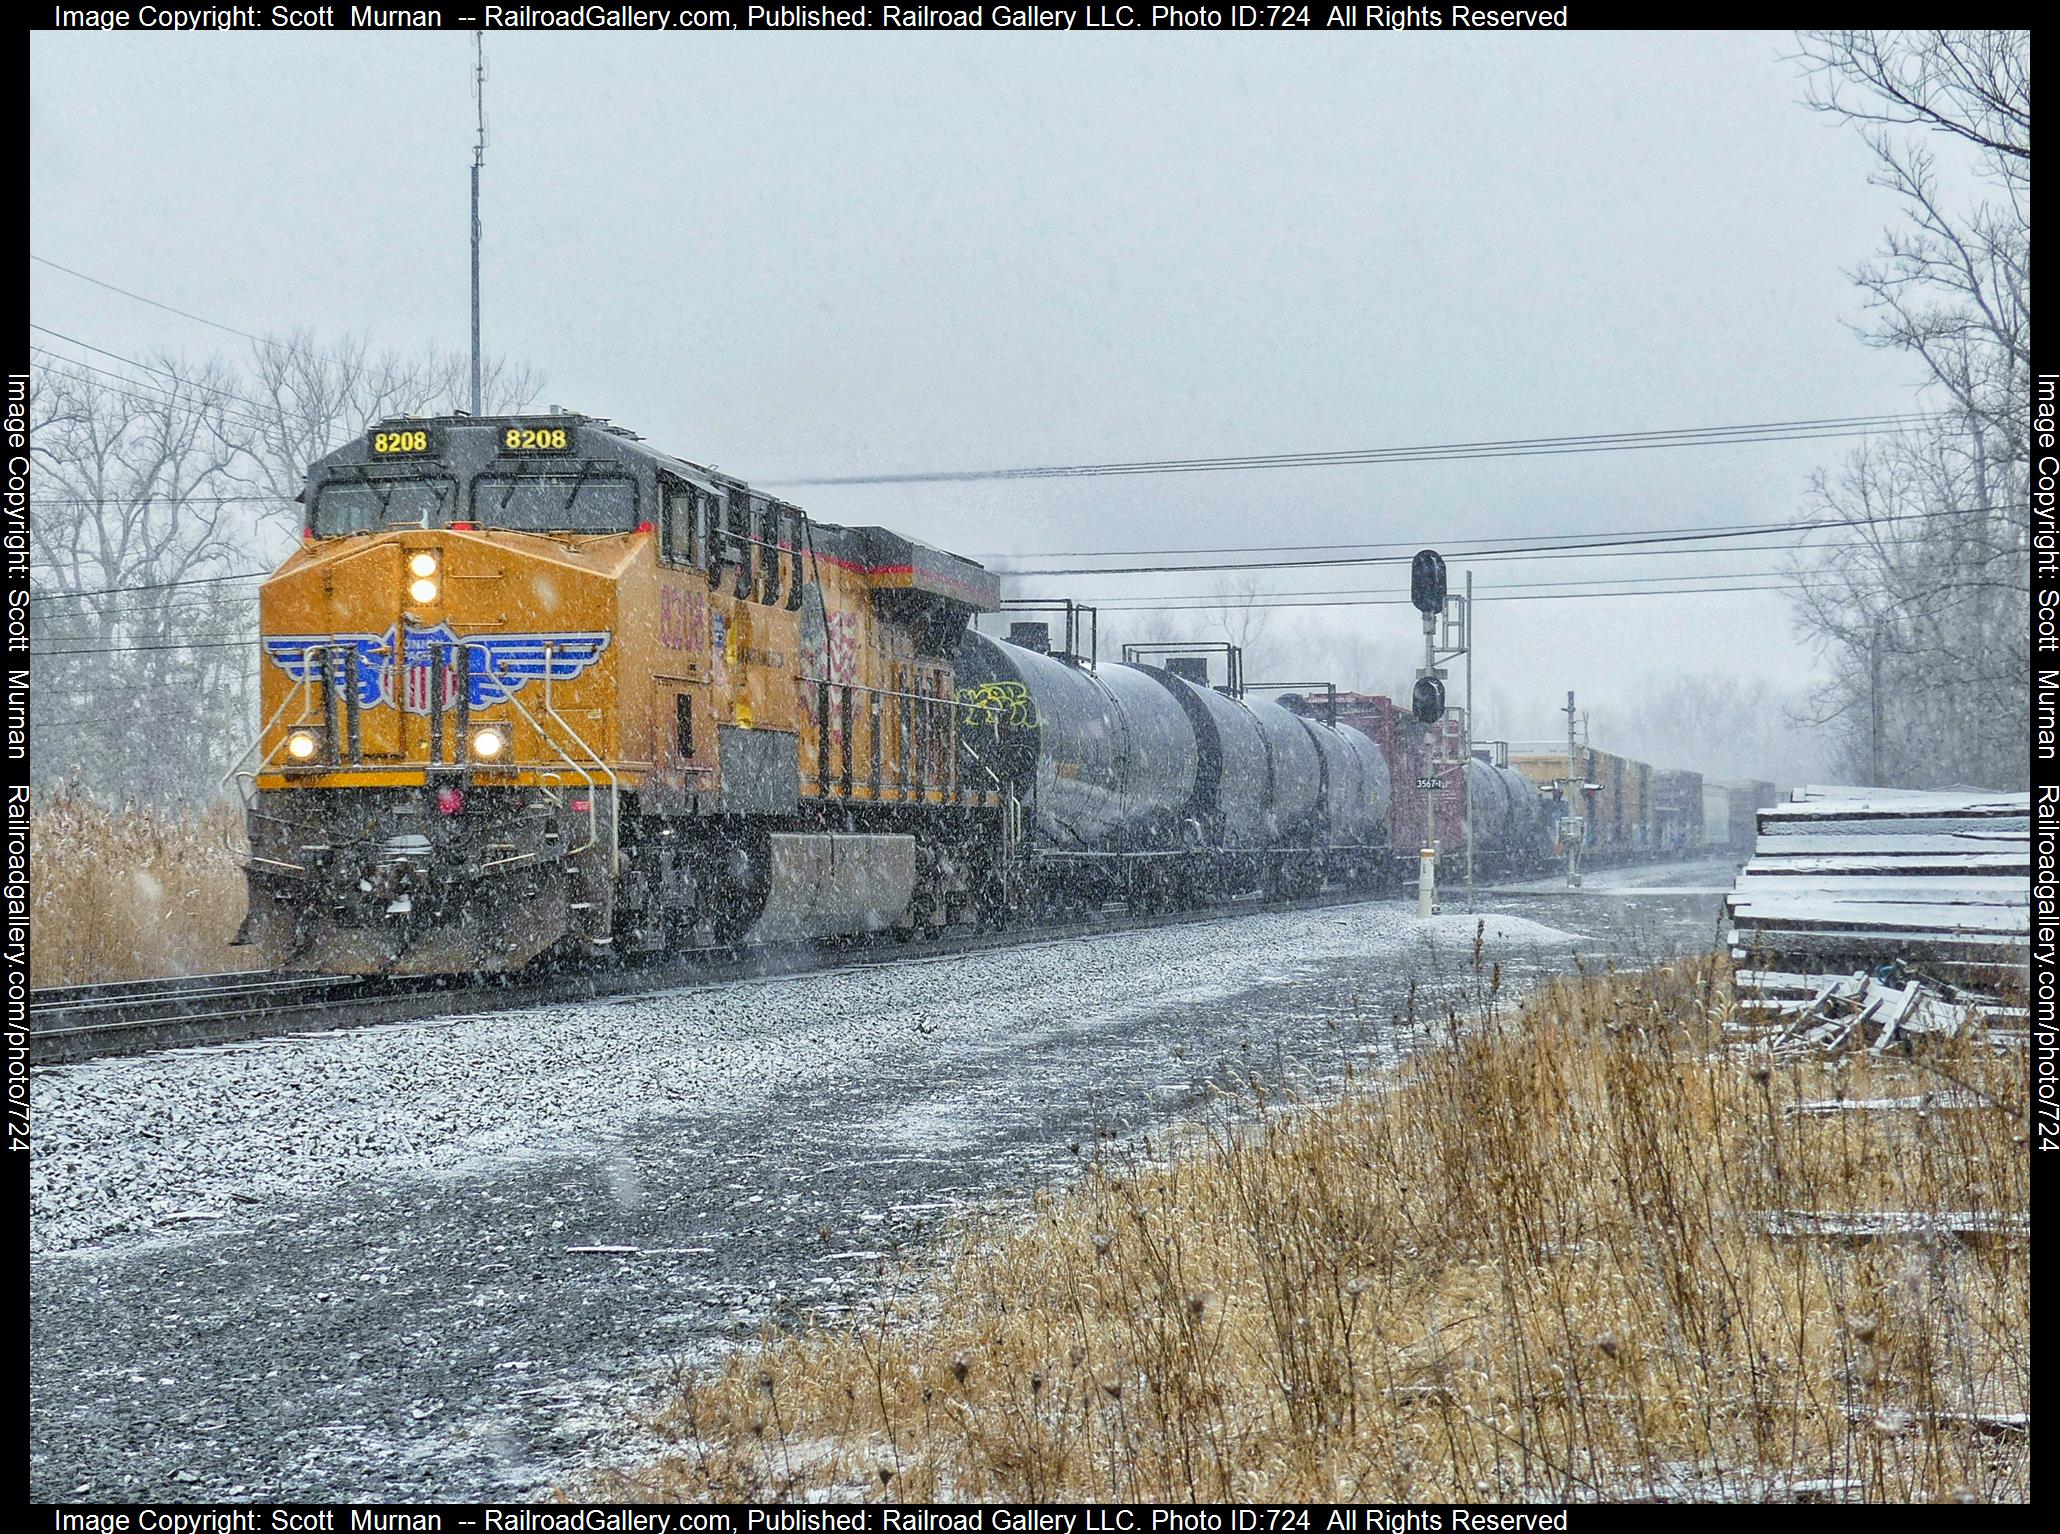 UP 8208 is a class GE ES44AC and  is pictured in Macedon, New York, United States.  This was taken along the Rochester Subdivision  on the CSX Transportation. Photo Copyright: Scott  Murnan  uploaded to Railroad Gallery on 02/22/2023. This photograph of UP 8208 was taken on Wednesday, February 22, 2023. All Rights Reserved. 